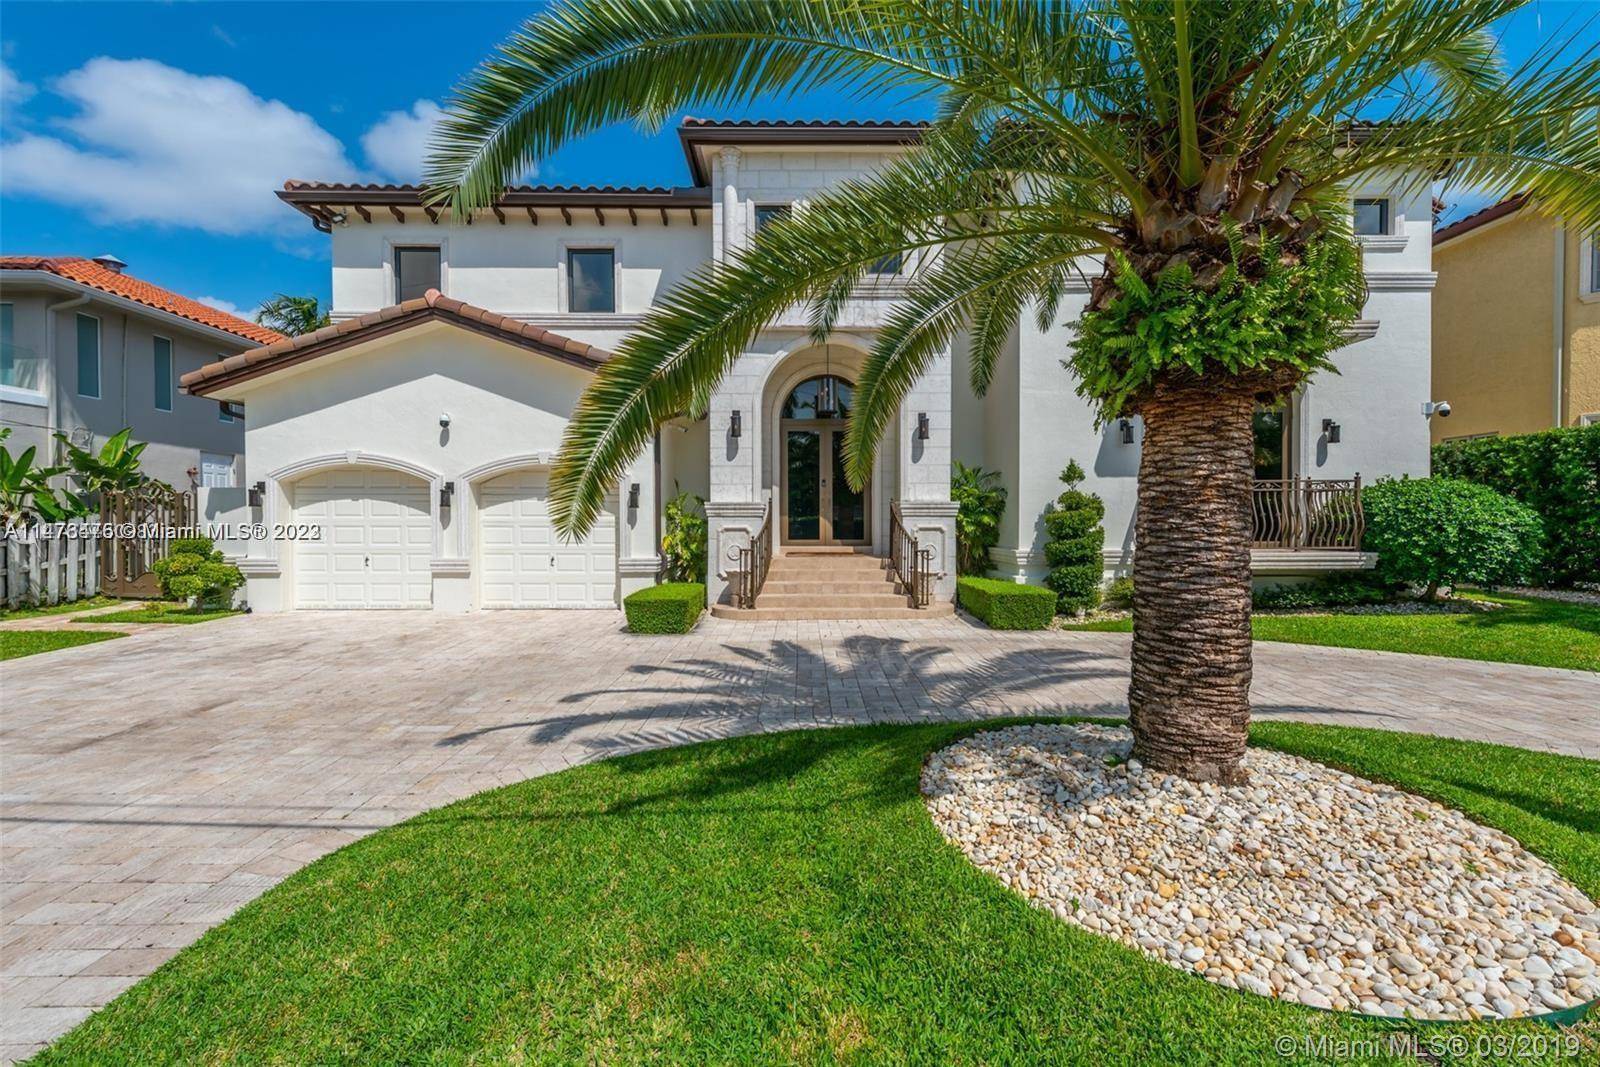 Timeless Luxury Mediterranean Residence located in the exclusive Eastern Shores neighborhood is tastefully furnished by Restoration Hardware, Features a dramatic facade and ceiling height lobby, elegant formal dining room small ...